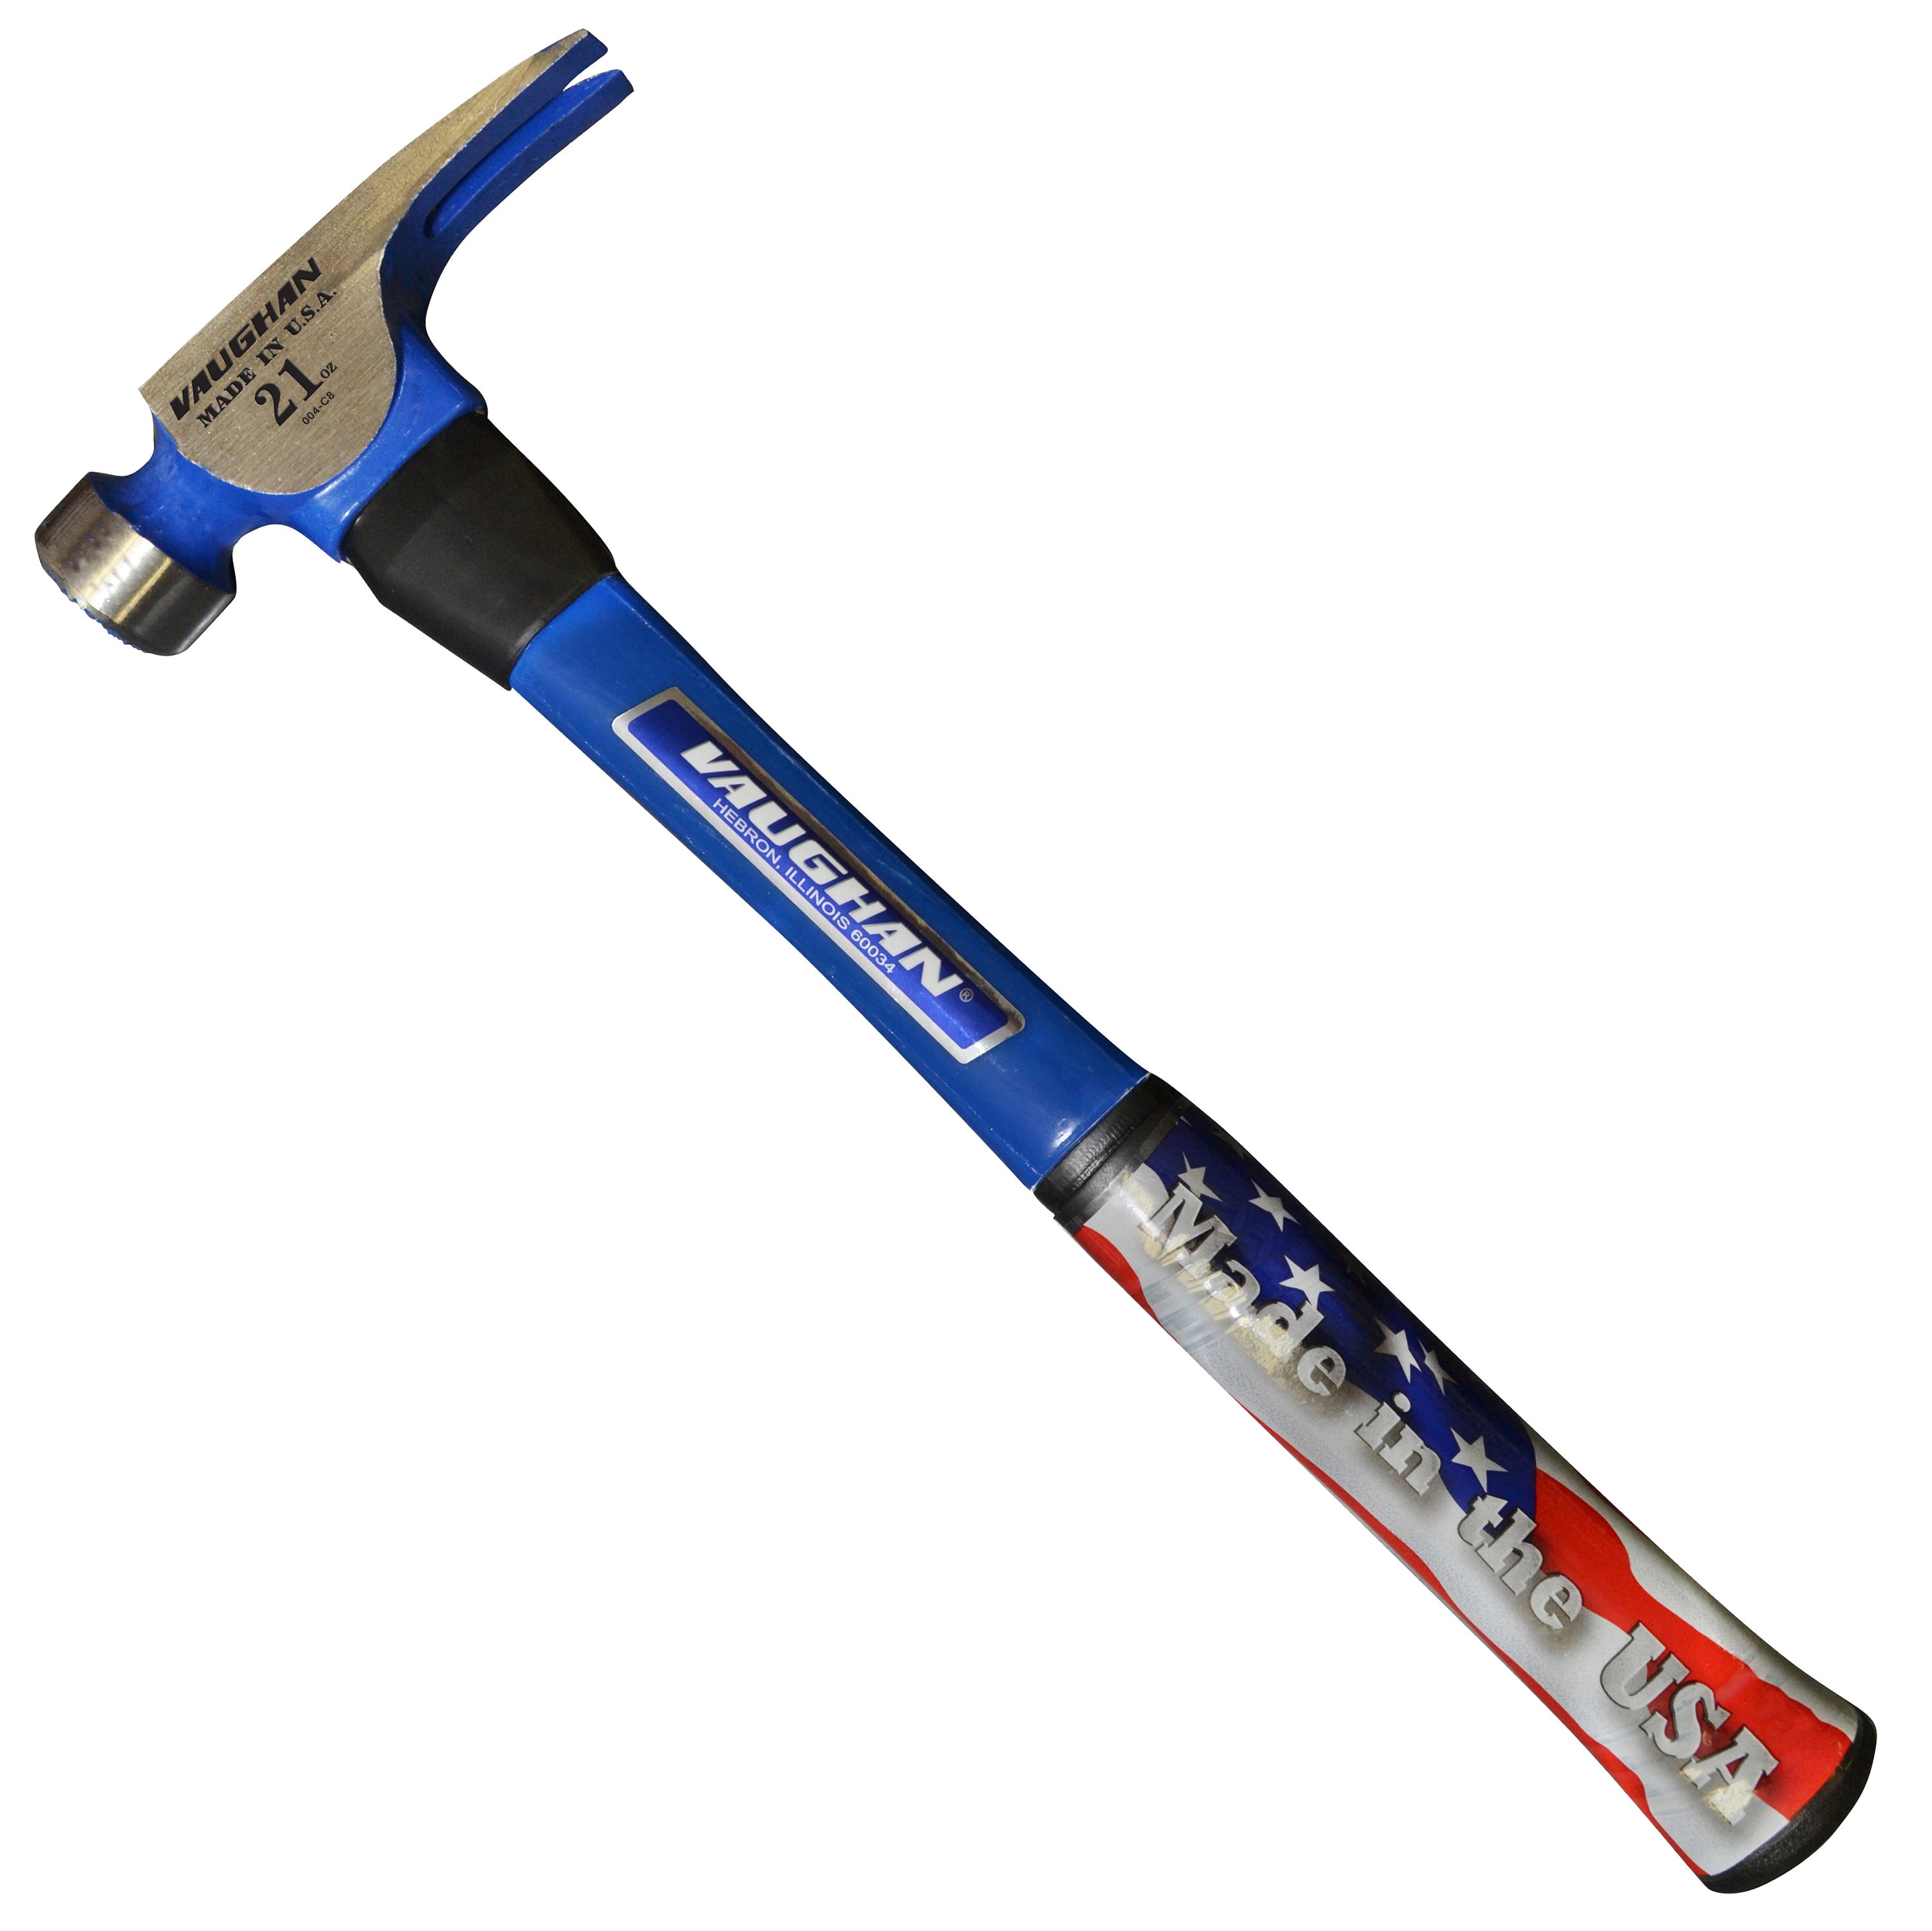 Estwing 20 oz Smooth Face Rip Hammer Steel Handle - Ace Hardware